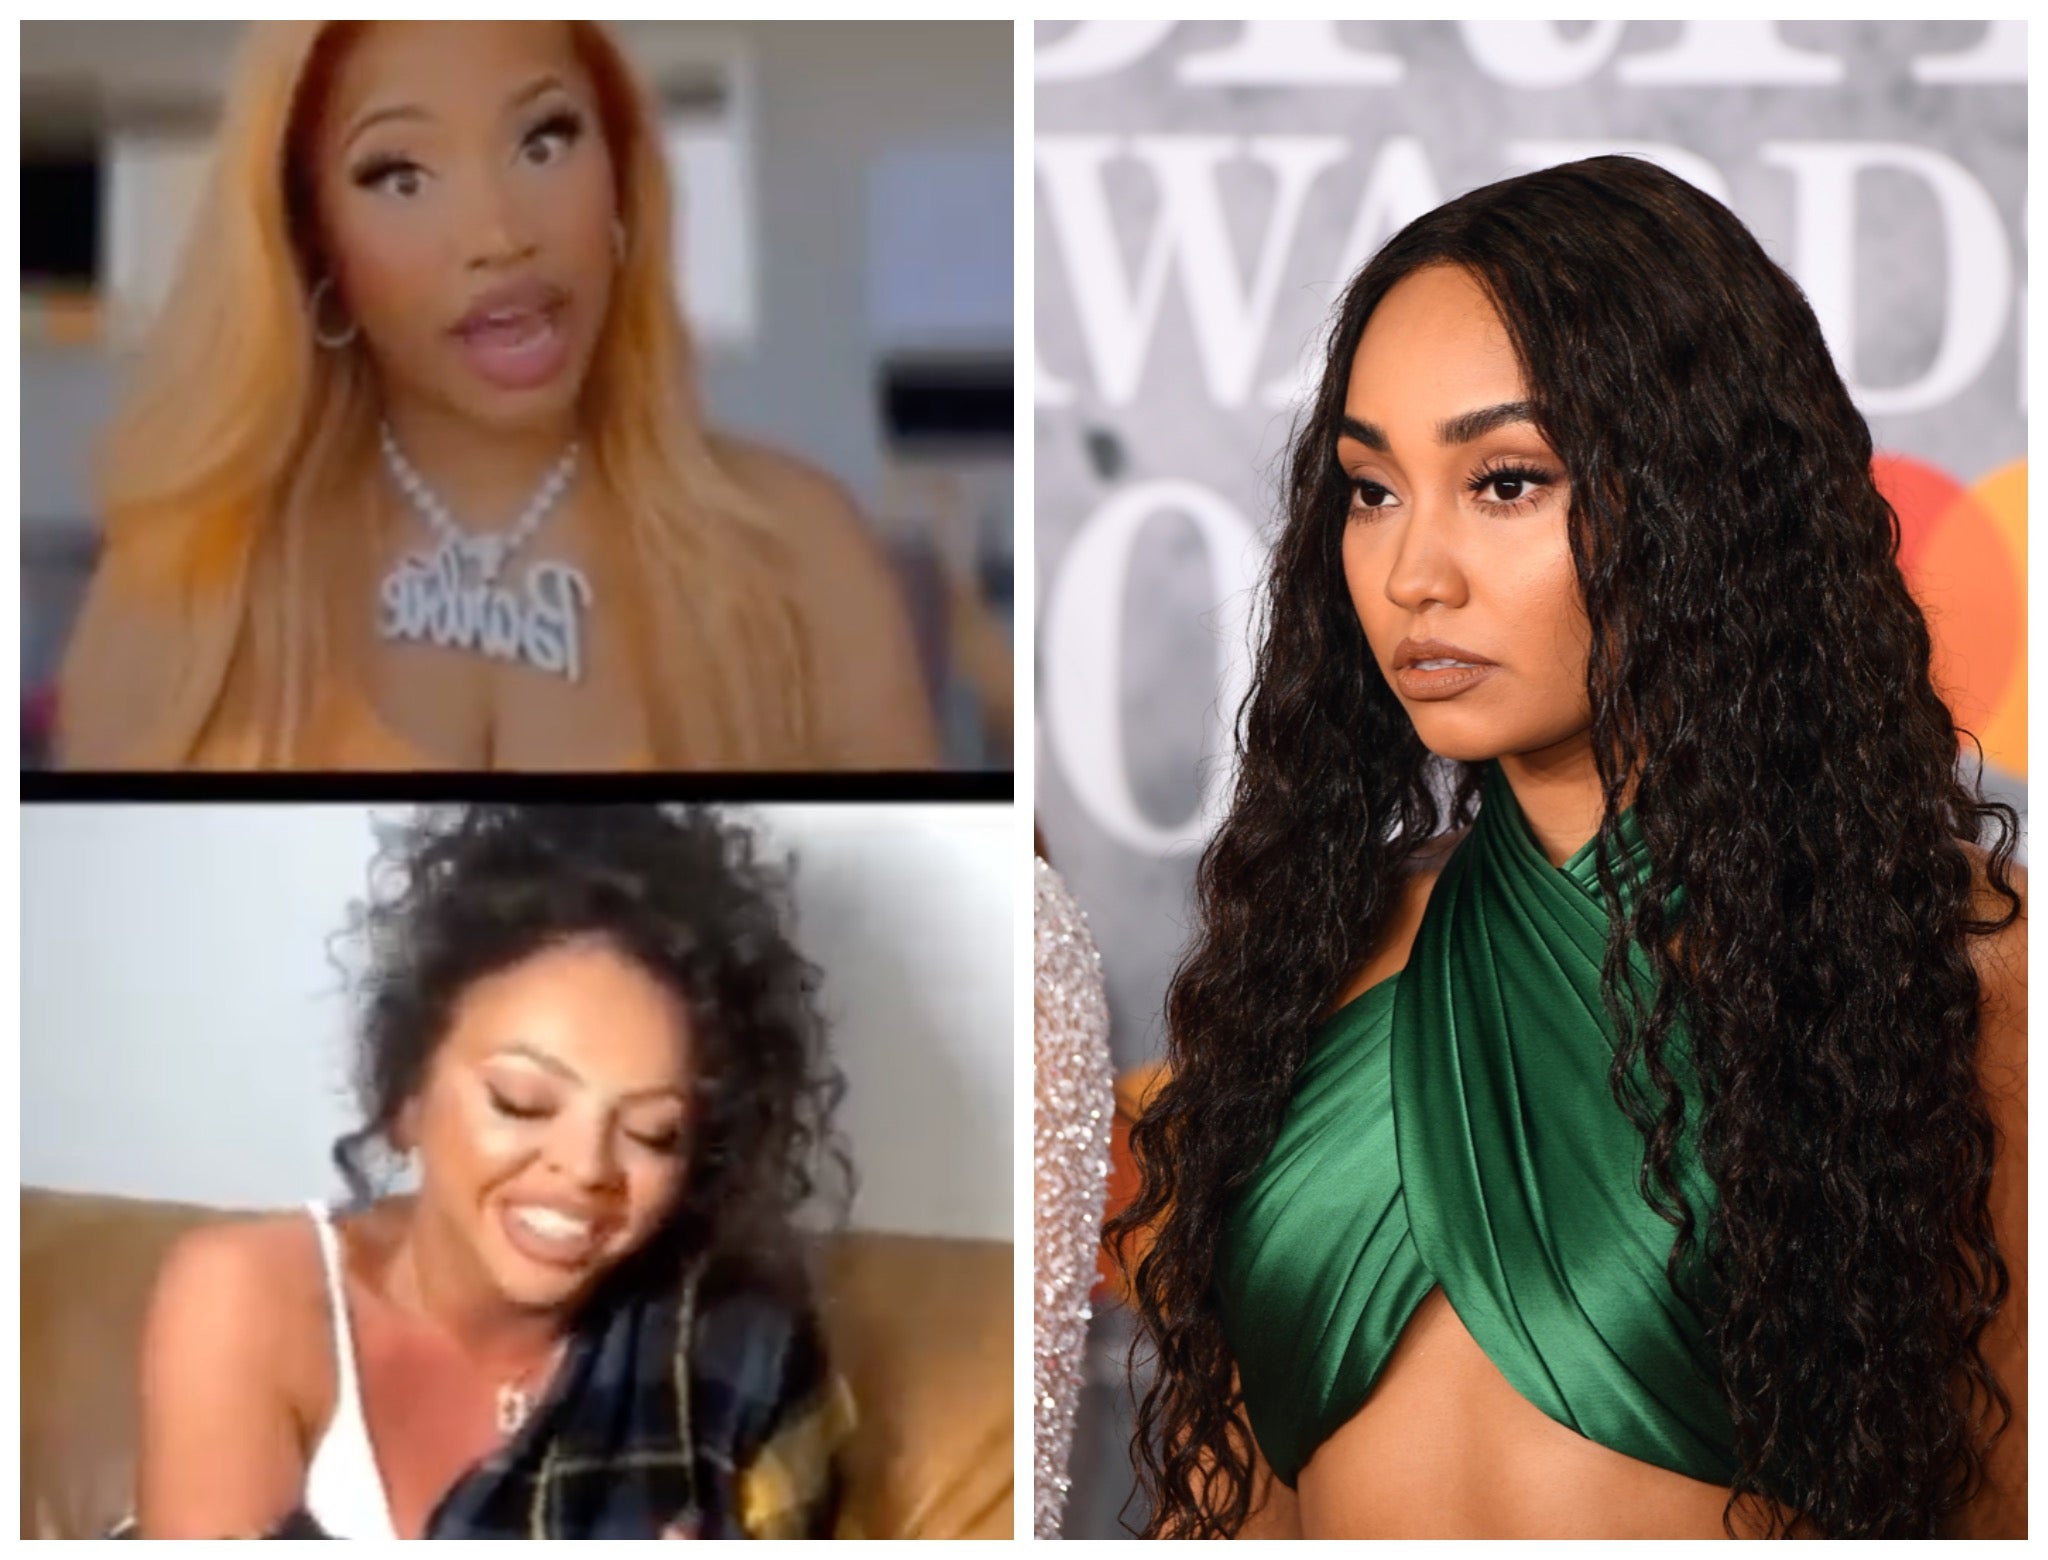 Nicki Minaj (top left) and Jesy Nelson (bottom left) took part in an Instagram Live in which they appeared to mock Nelson’s former bandmate, Leigh-Anne Pinnock